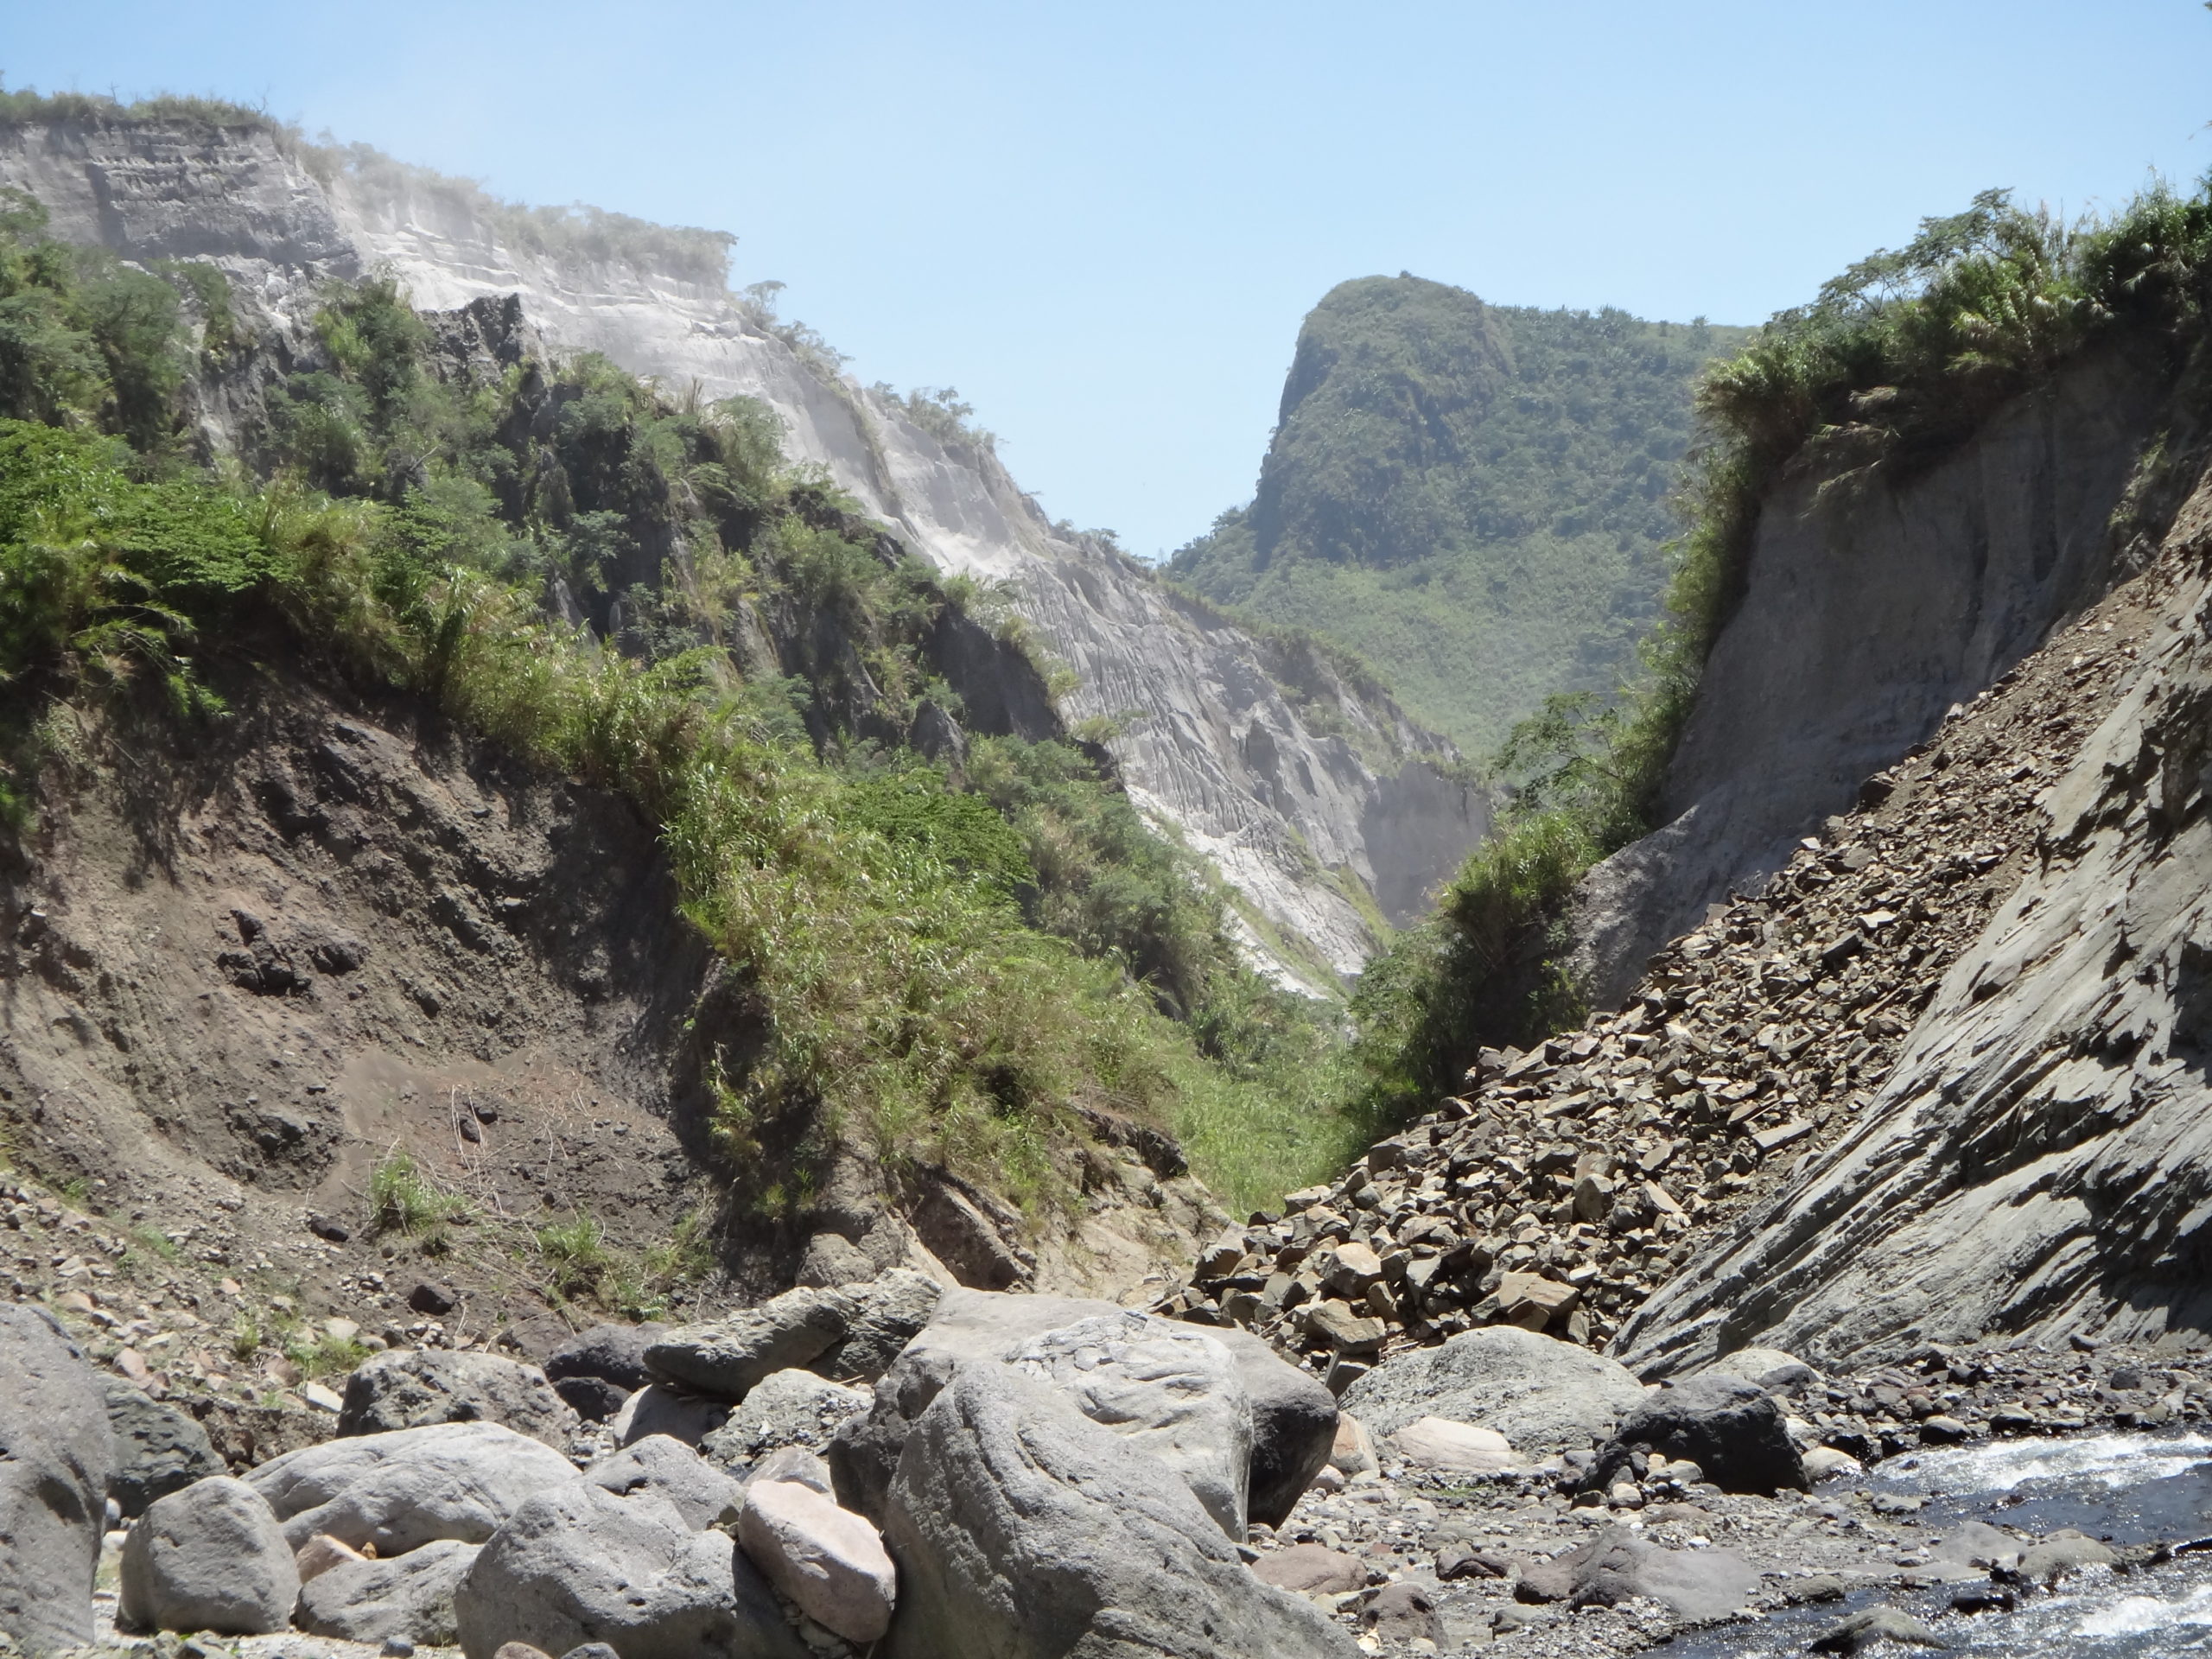 The Pinatubo landscape still shows evidence of the 1991 eruption. (Image: © Danny Balete, Field Museum)